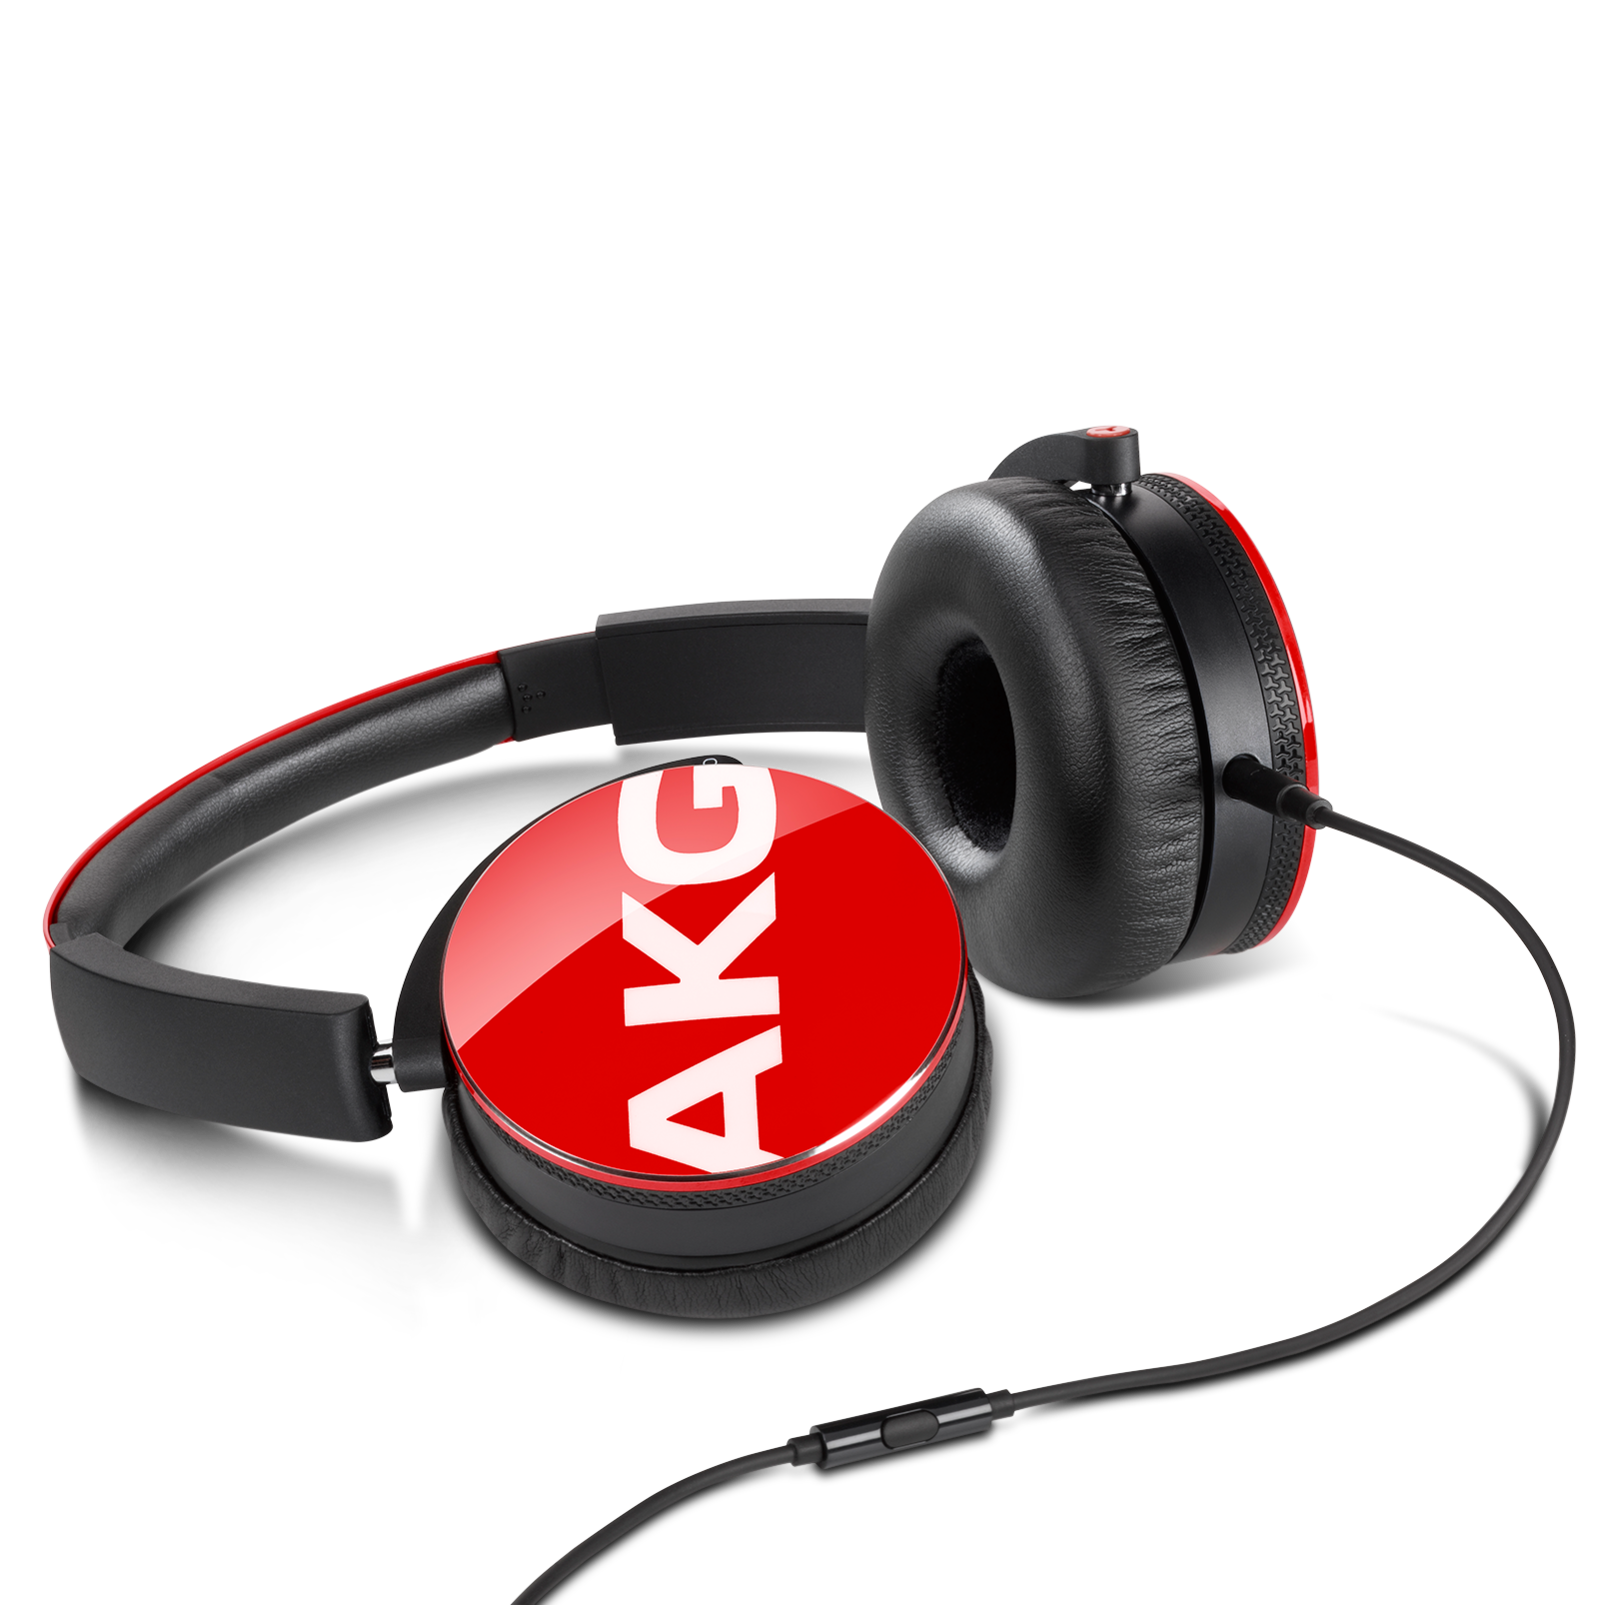 Y50 - Red - On-ear headphones with AKG-quality sound, smart styling, snug fit and detachable cable with in-line remote/mic - Detailshot 3